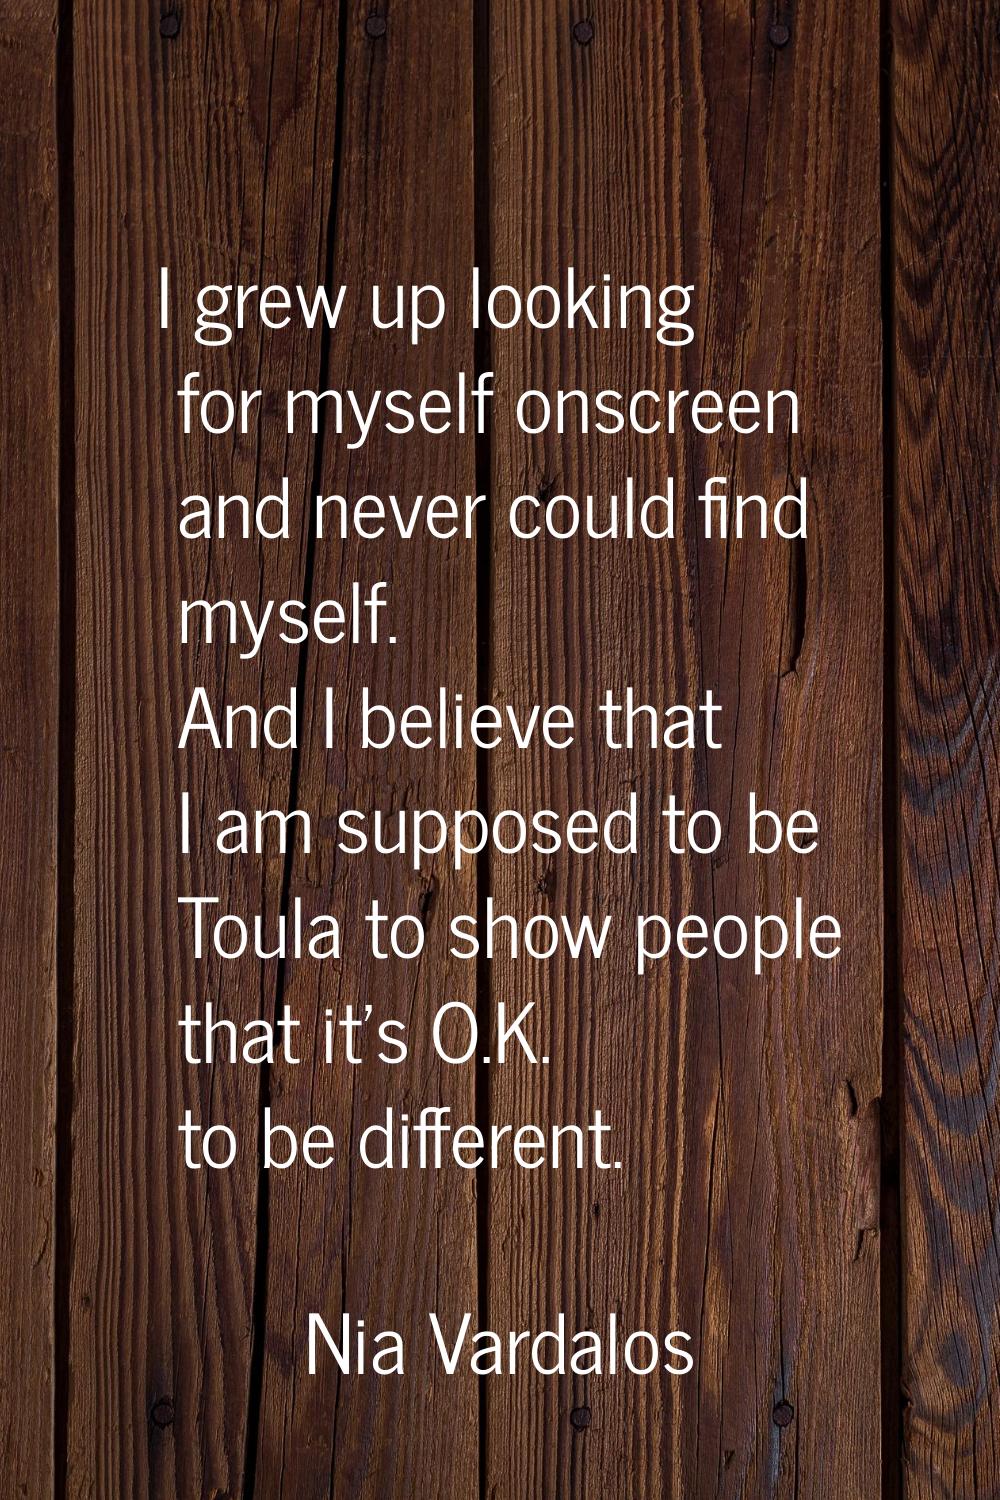 I grew up looking for myself onscreen and never could find myself. And I believe that I am supposed